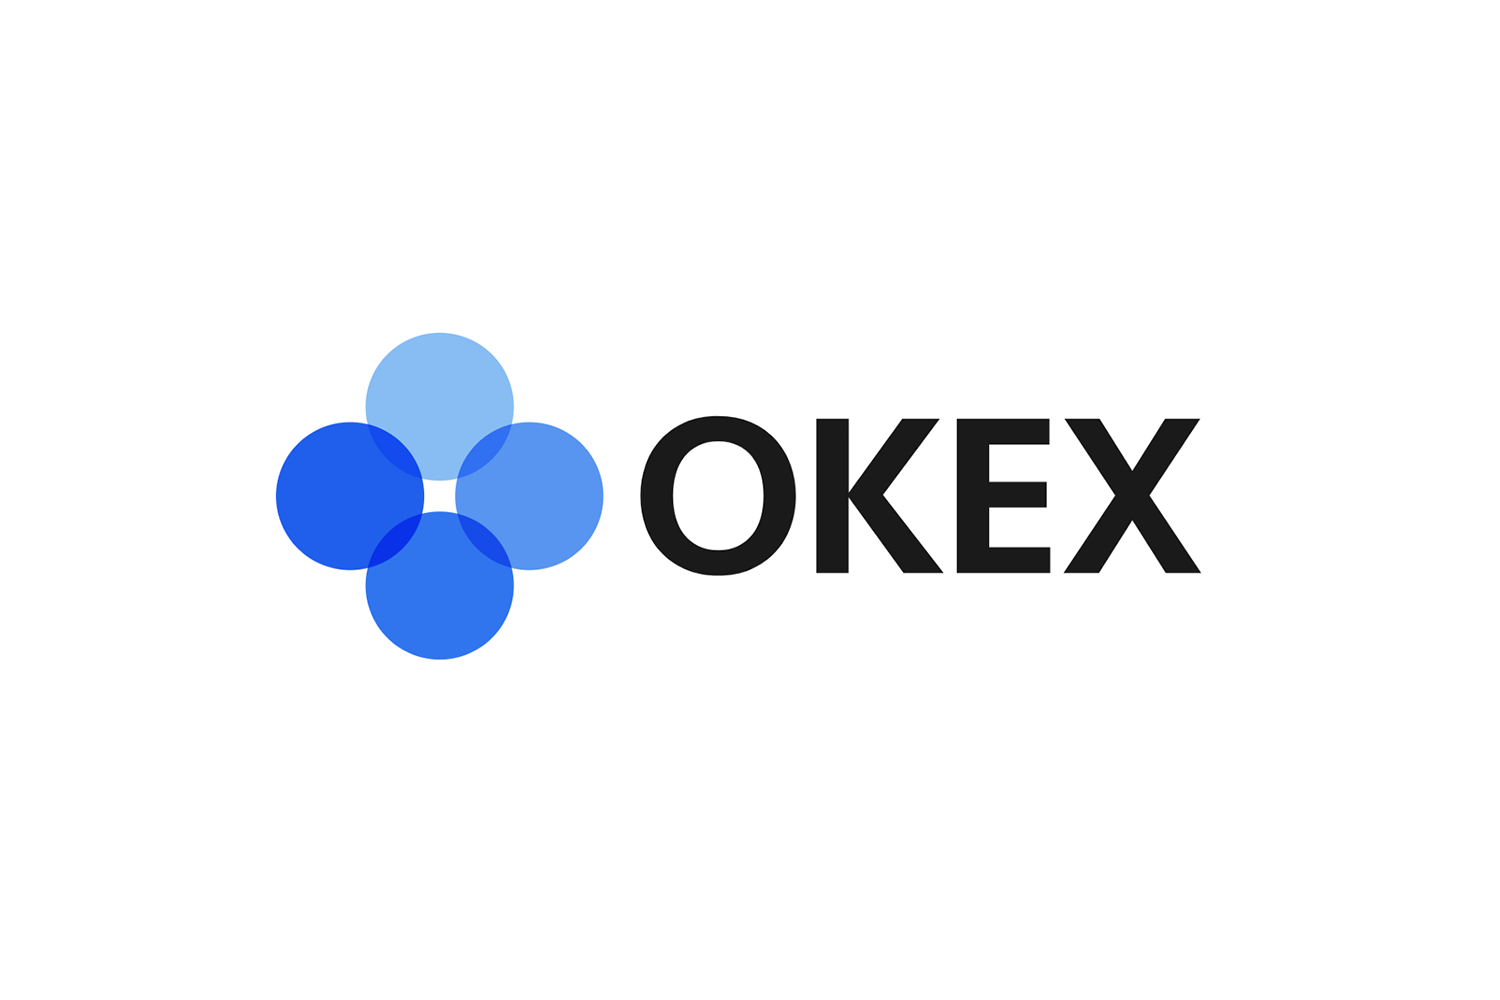 OKEx Launches Tron (TRX) Perpetual Swaps and Increases Leverage on those of Ethereum (ETH) and EOS 10